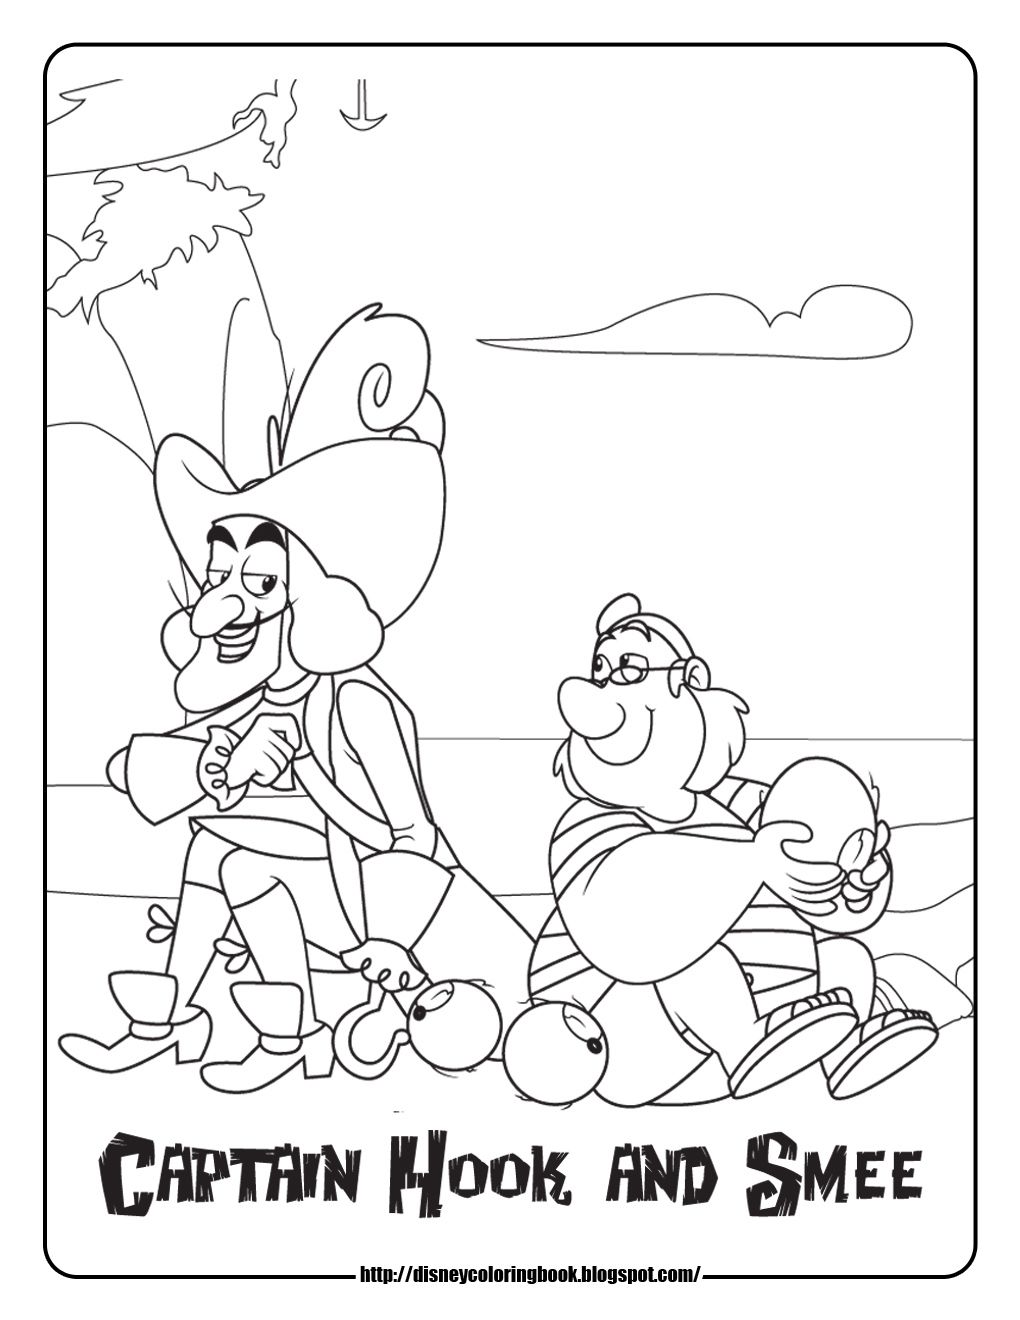 Leo's coloring book | Coloring ...